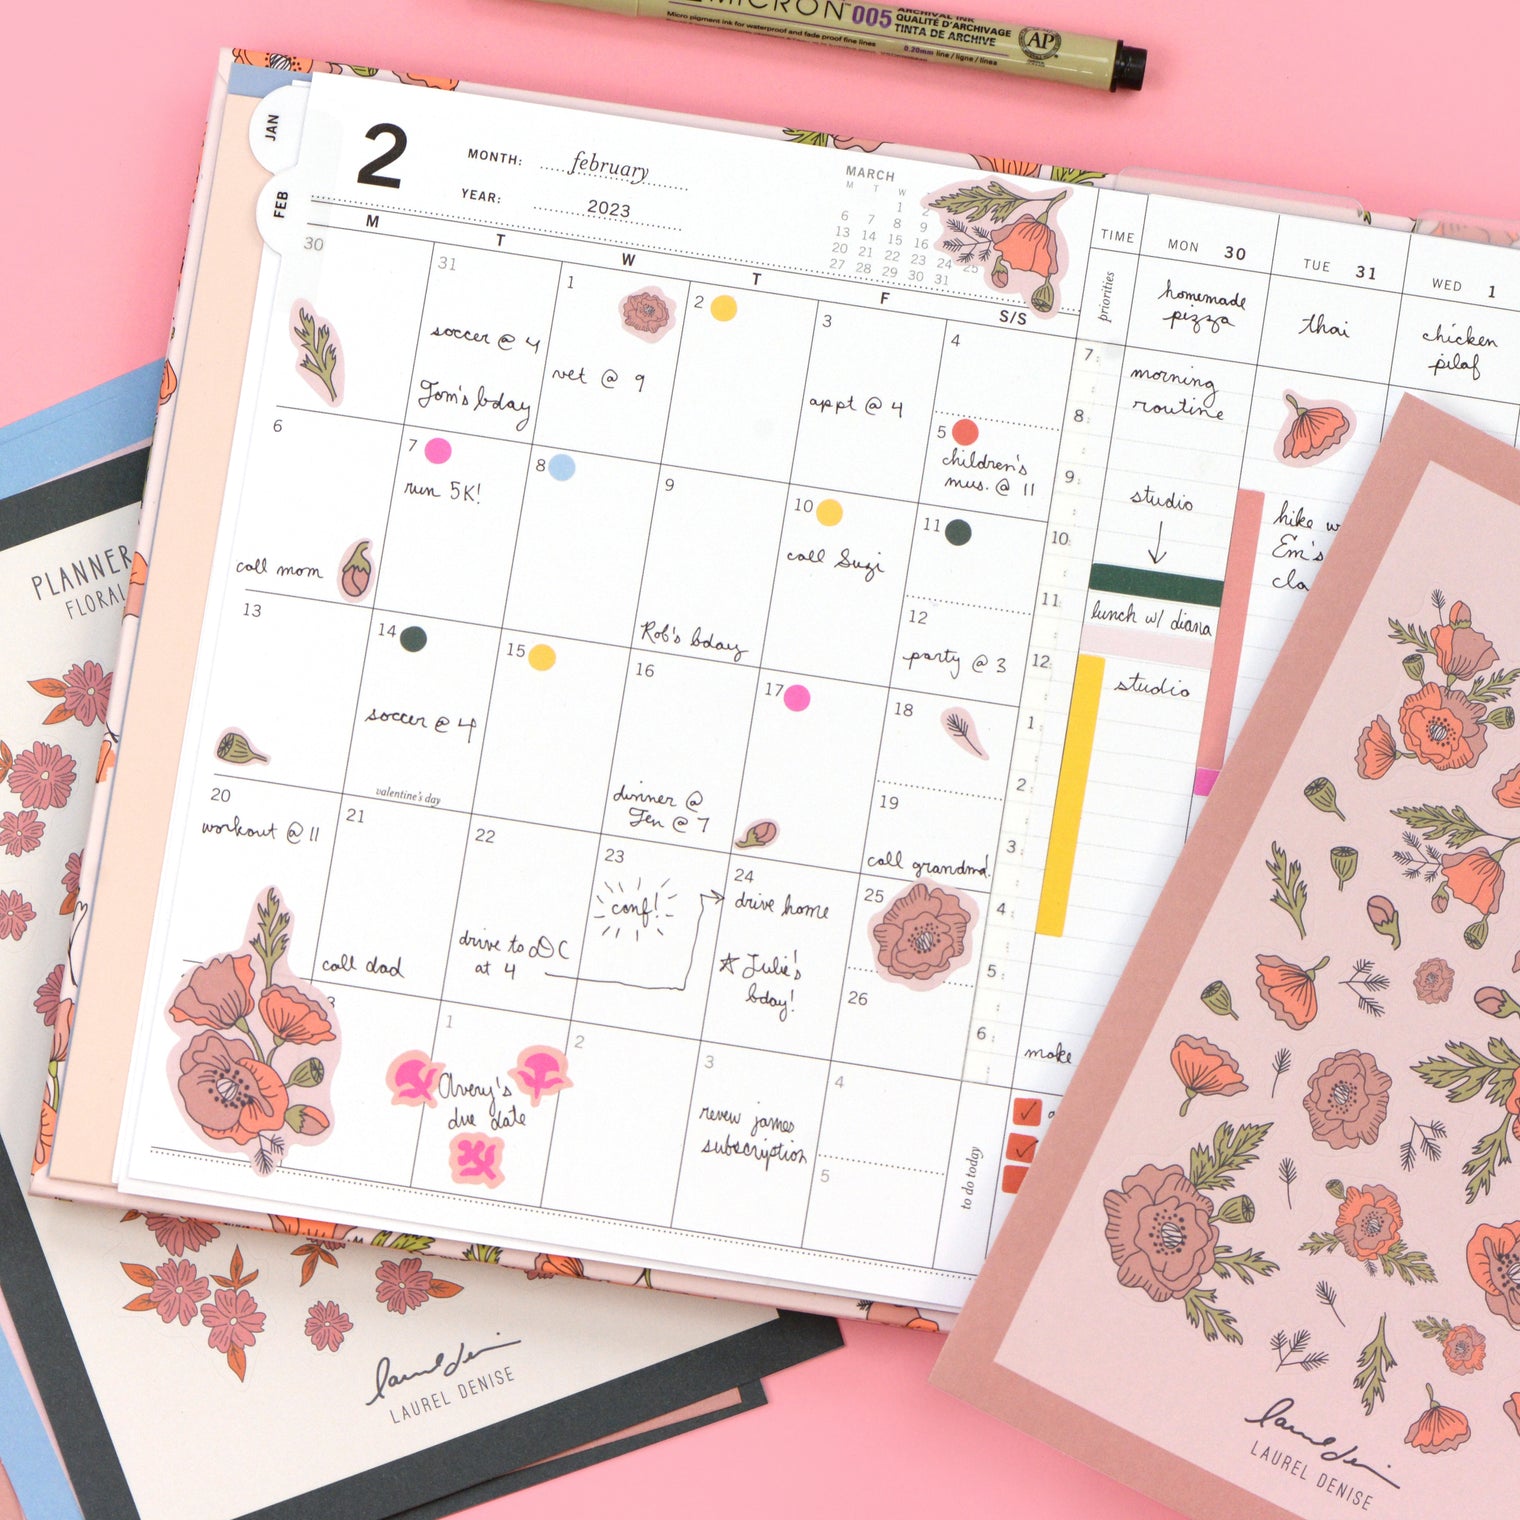 STICKERS IN PLANNER